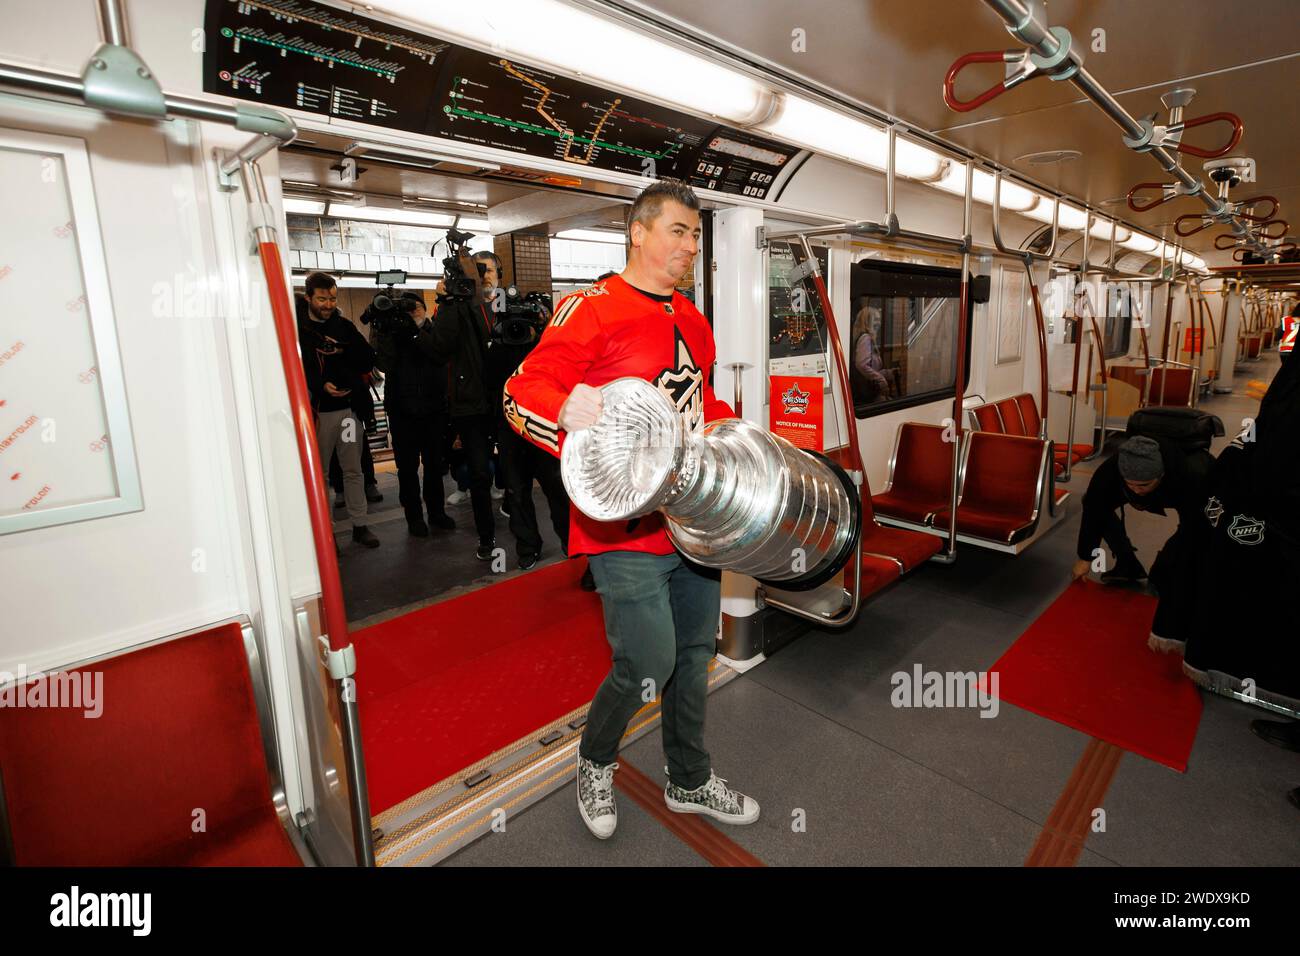 Former Toronto Maple Leafs hockey player Tomas Kaberle carries the Stanley Cup onto a subway car at Davisville station, in Toronto, Monday, Jan. 22, 2024, to promote the NHL All-Star game Feb. 3. (Cole Burston/The Canadian Press via AP) Stockfoto